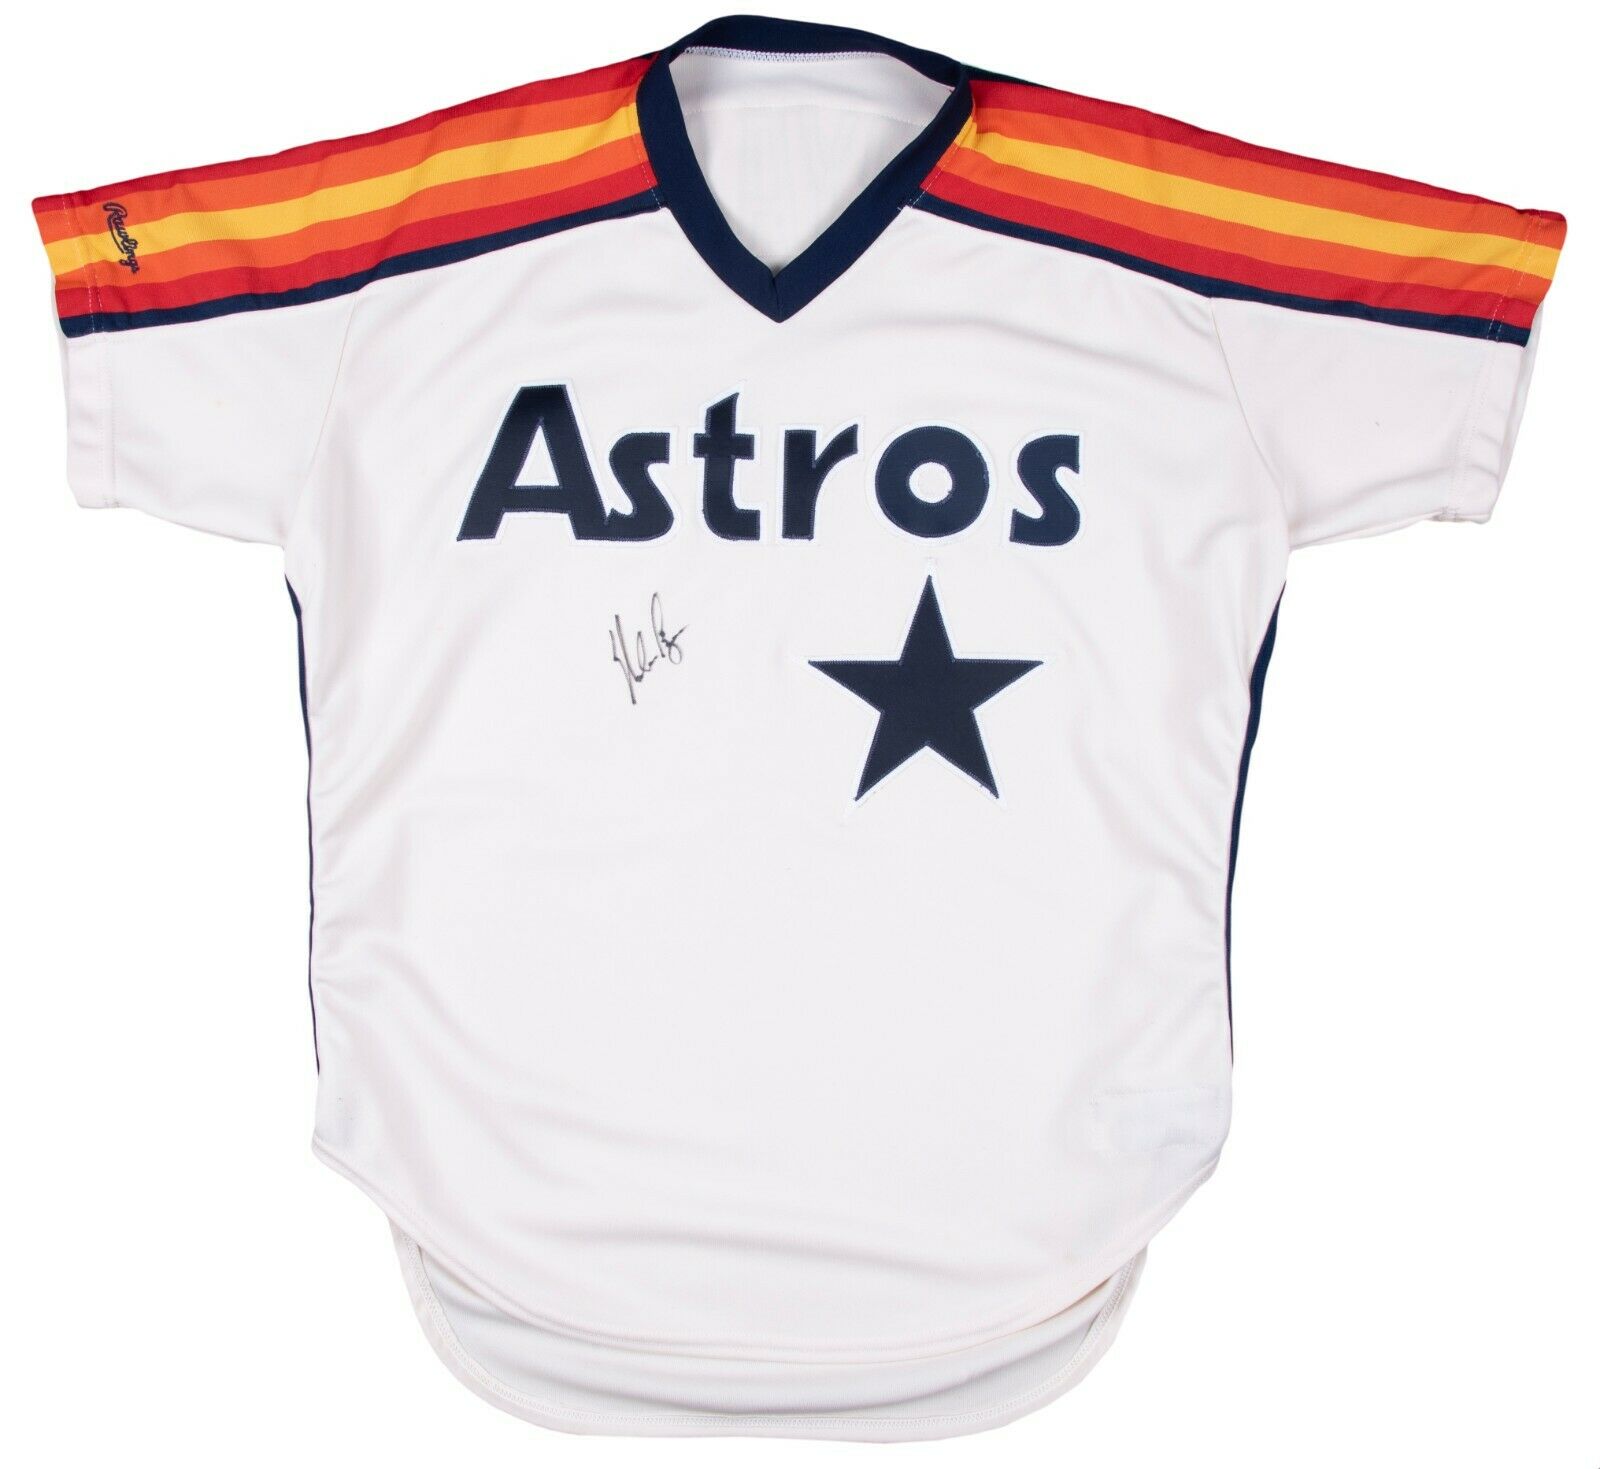 1987 Nolan Ryan Signed Houston Astros Authentic Team Issued Jersey